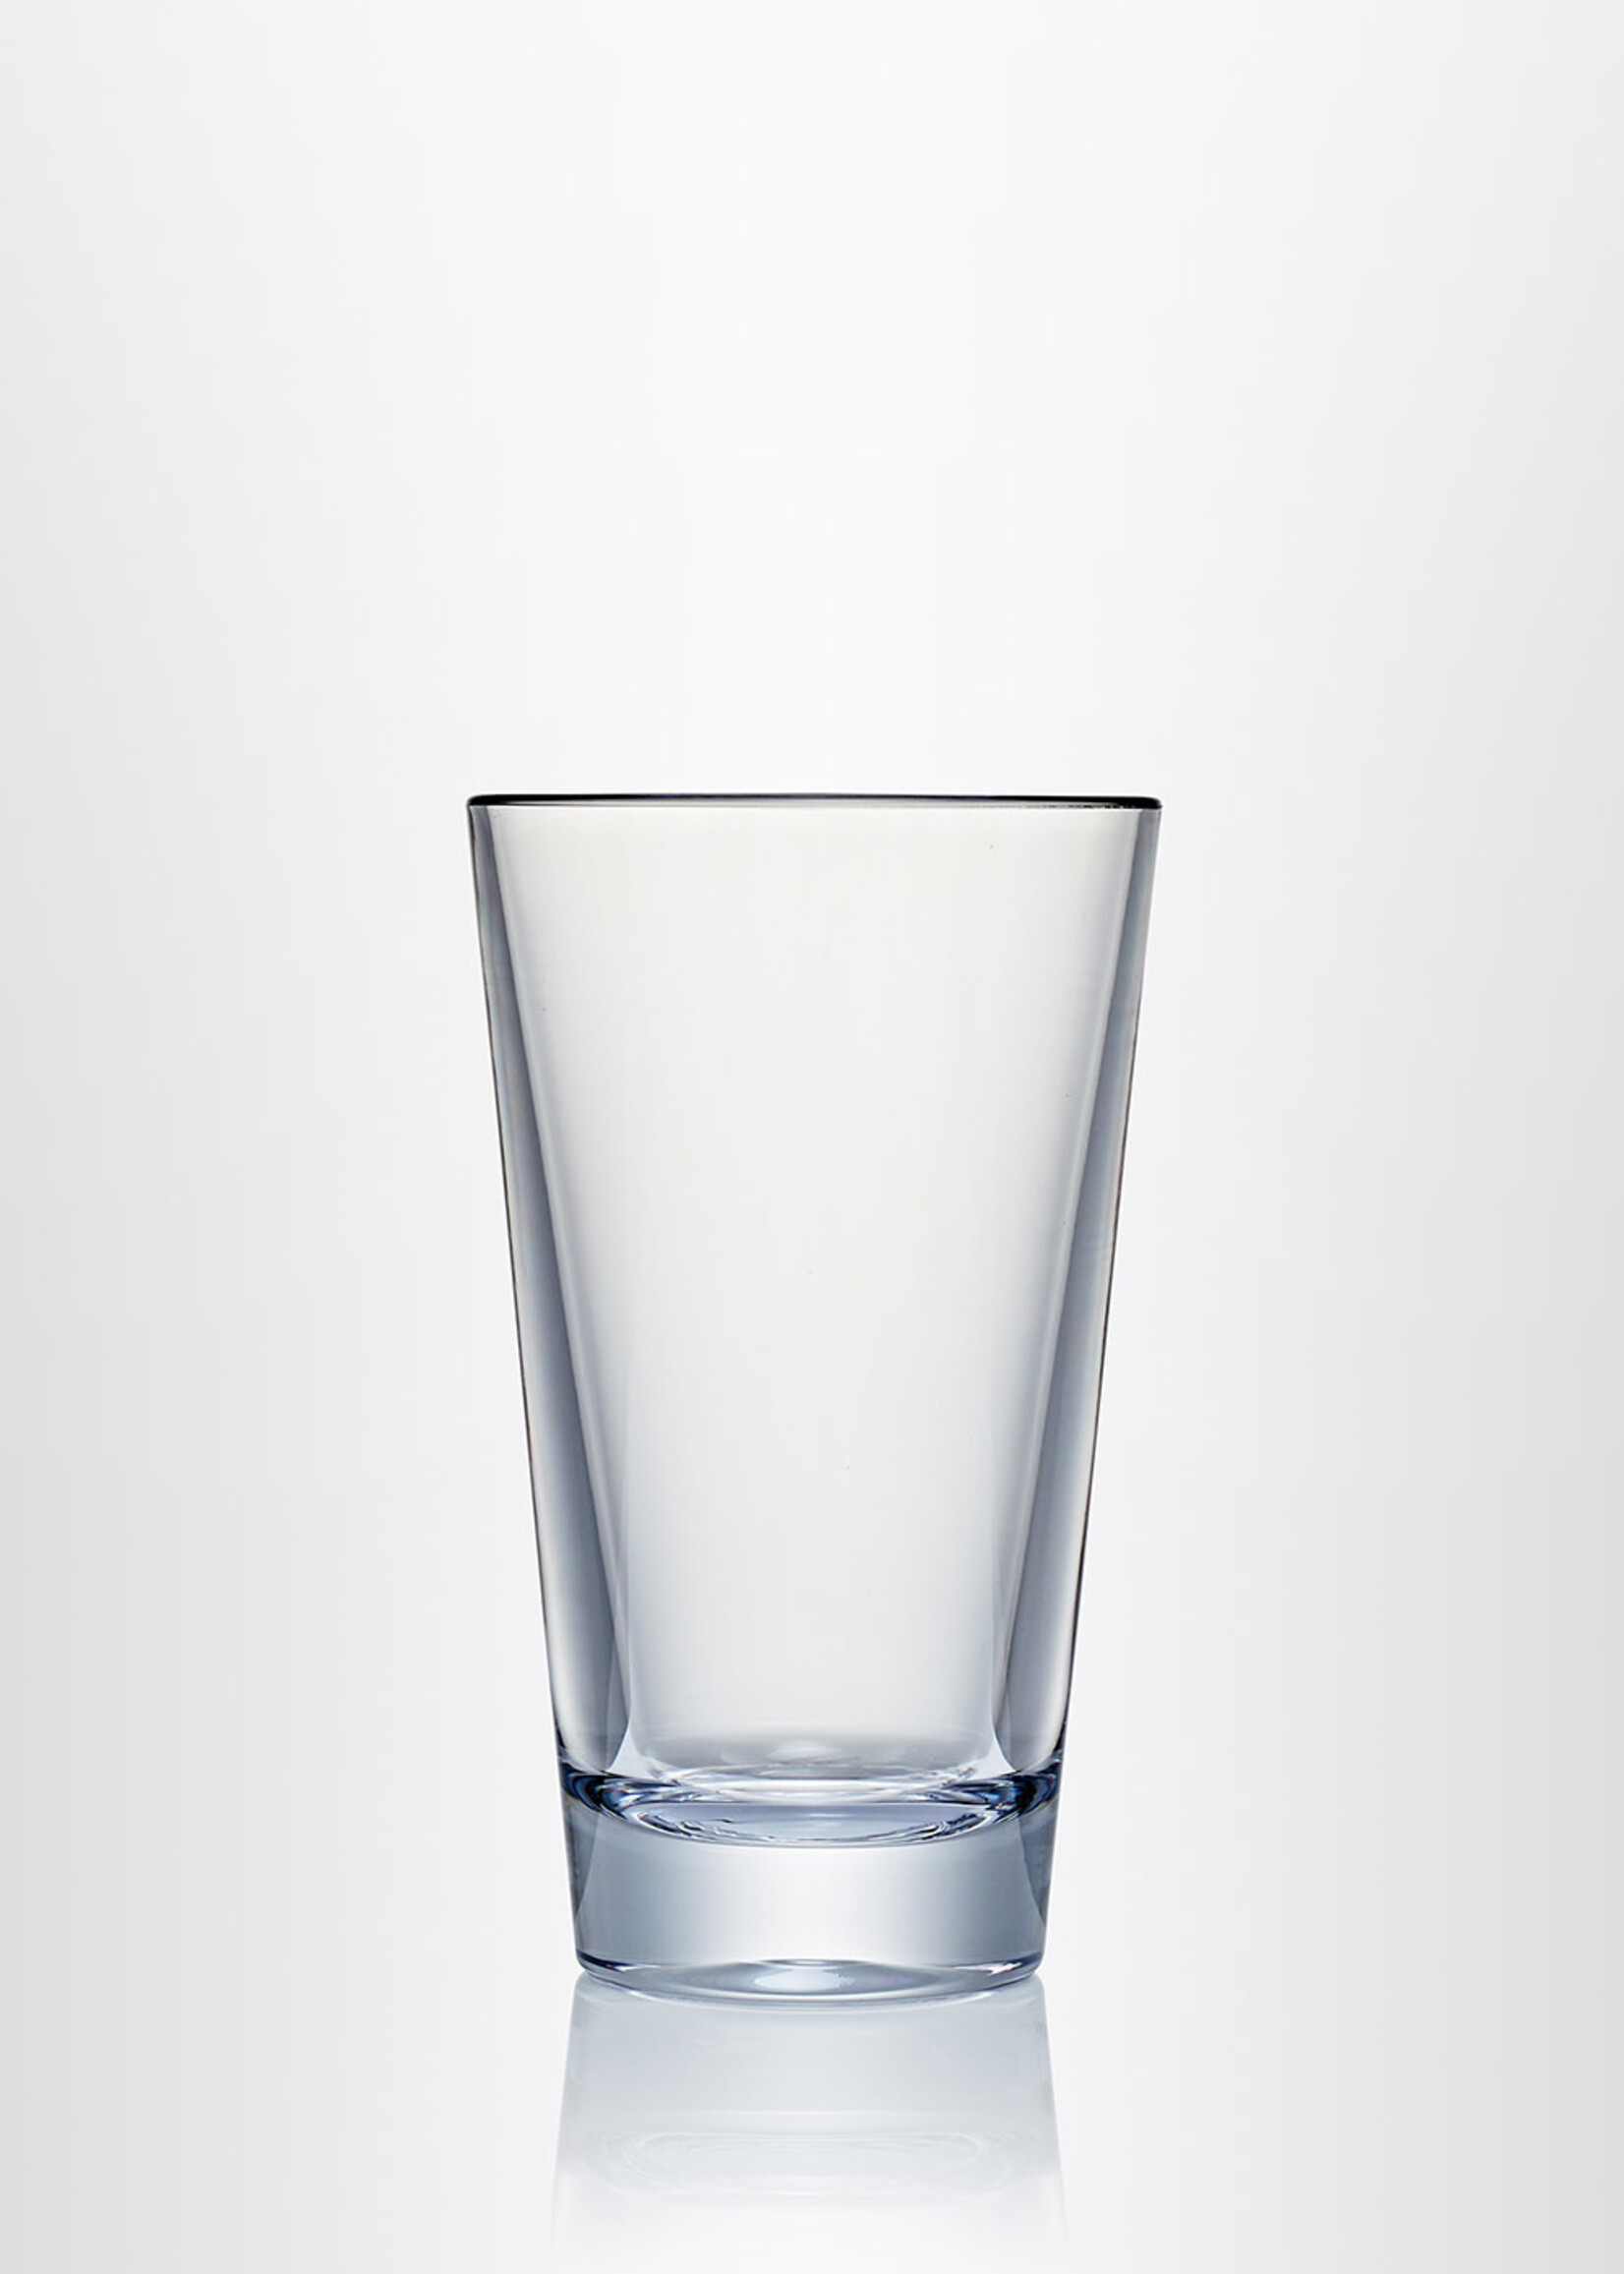 Strahl Design+ Mixing Glass 14oz.